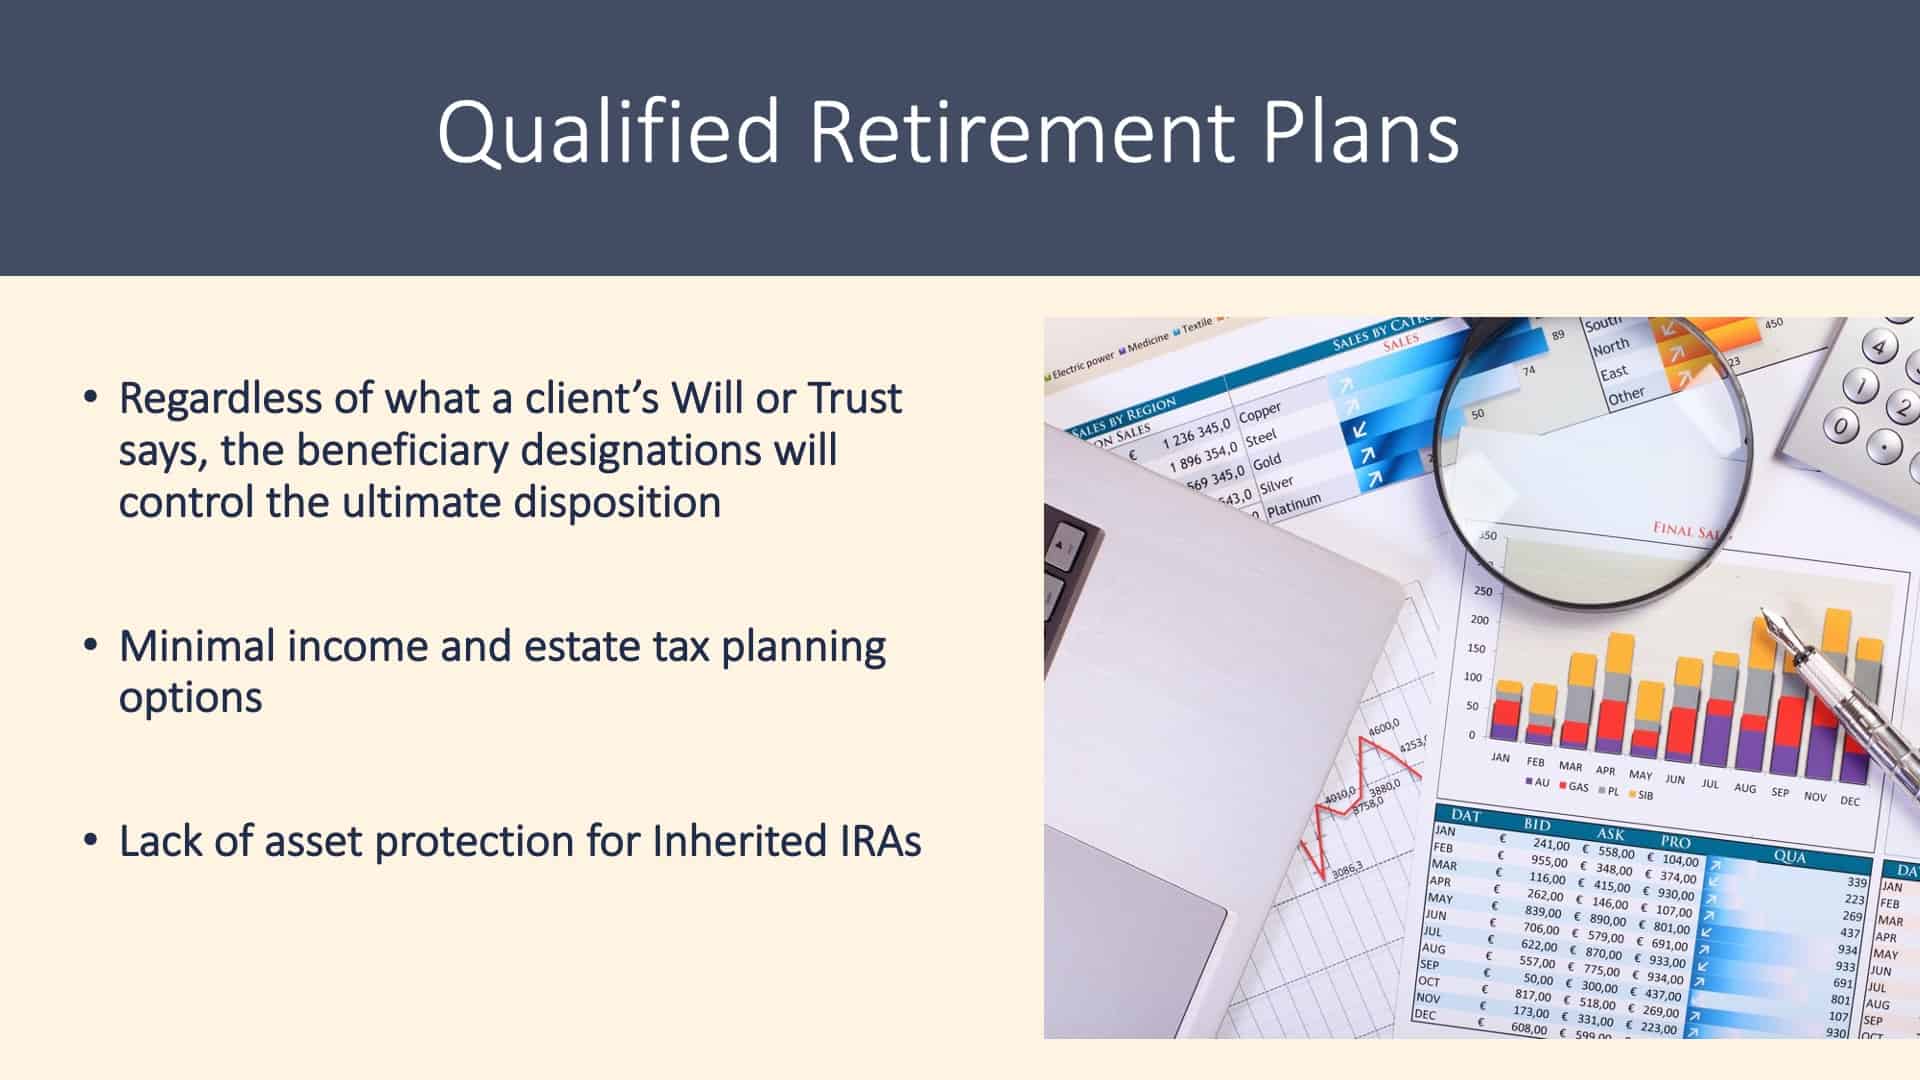 Is a Will Enough? - Qualified Retirement Plans